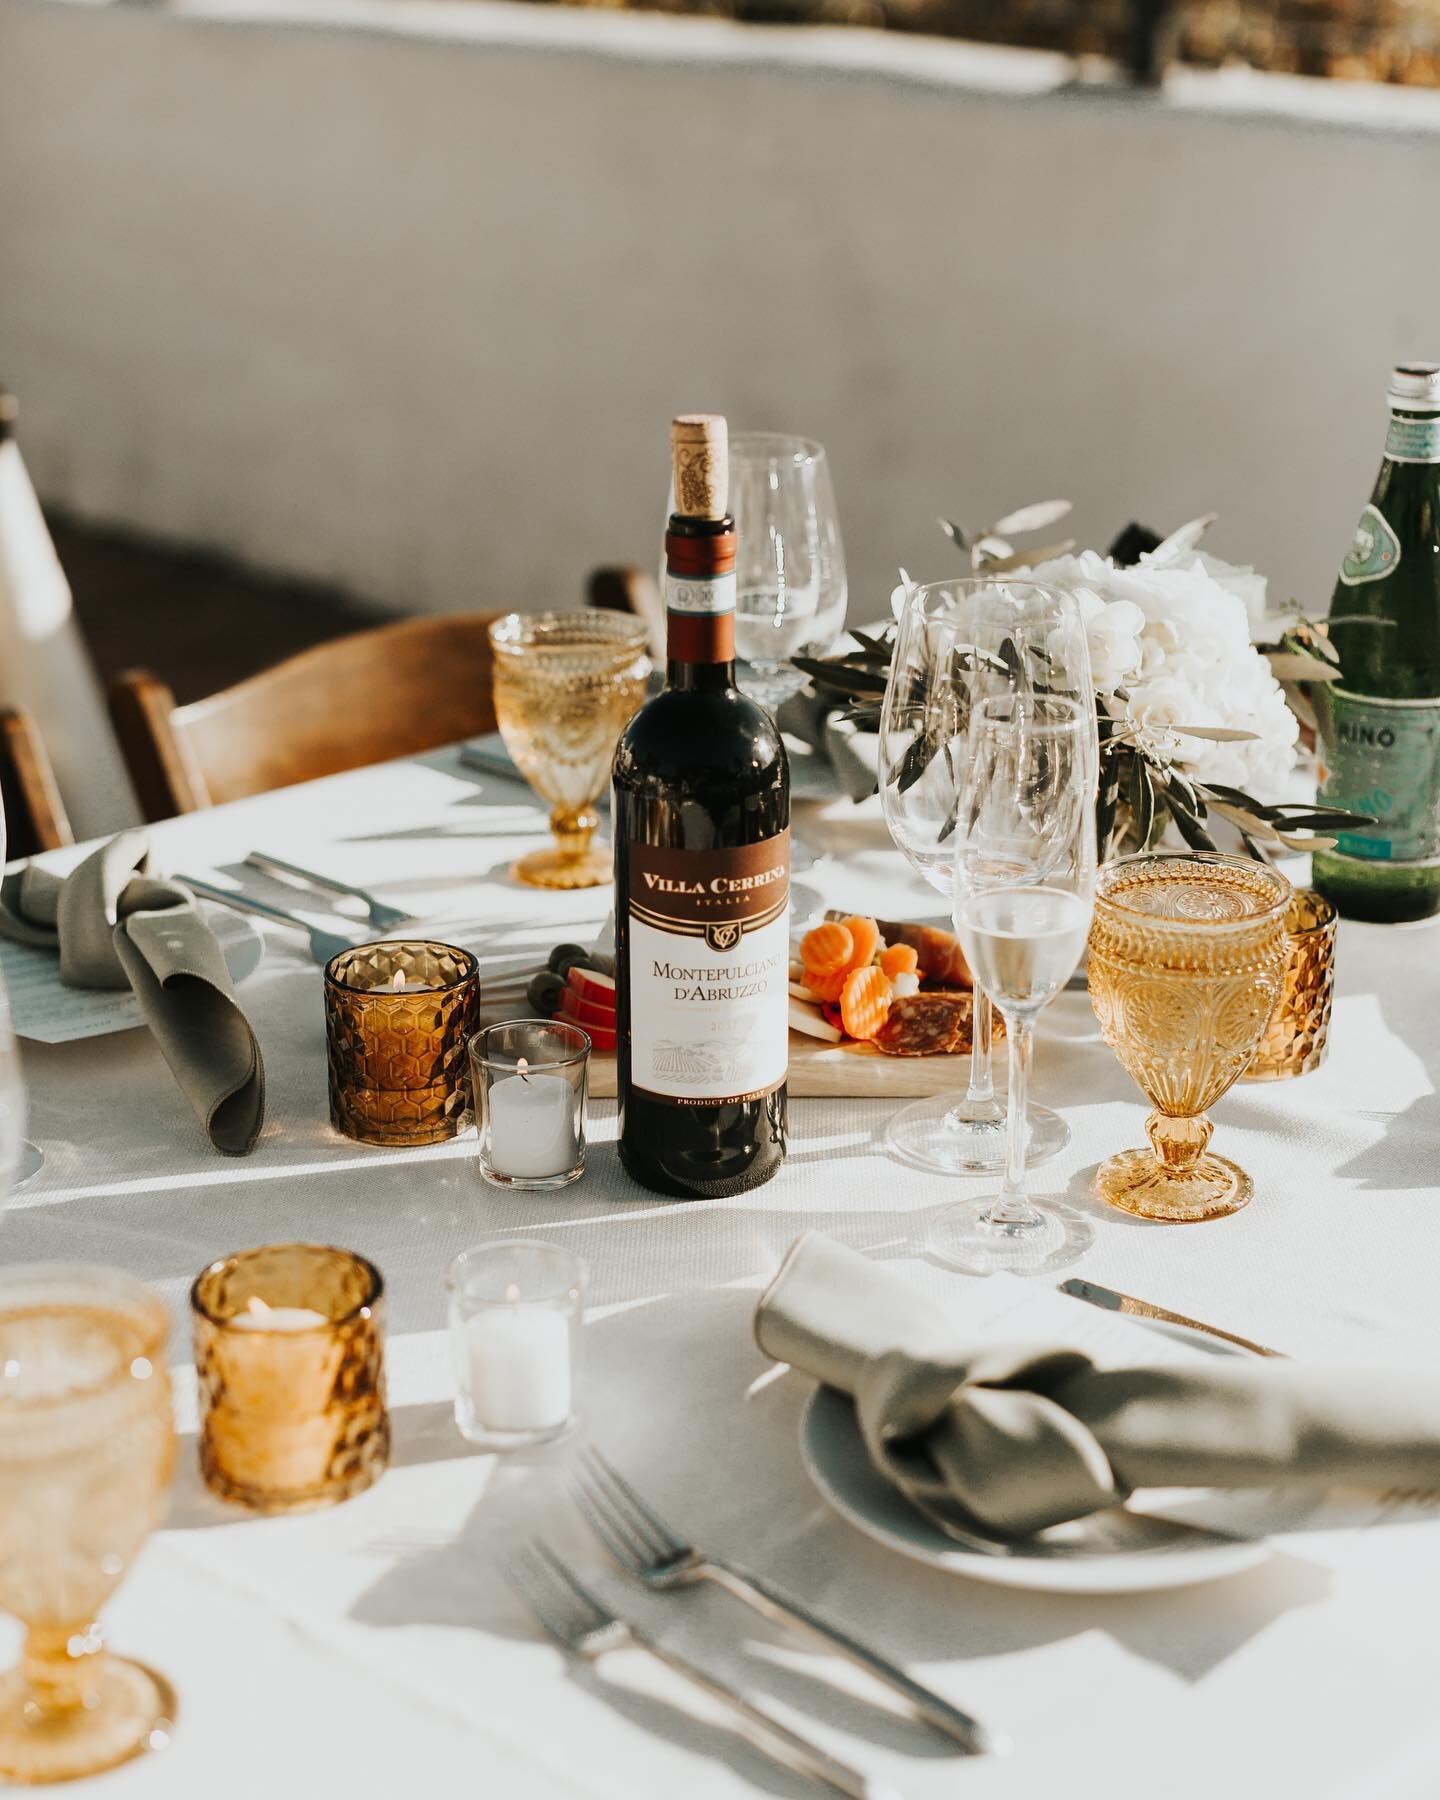 table settings will forever be a love language of mine, especially when they are set with red wine and charcuterie.